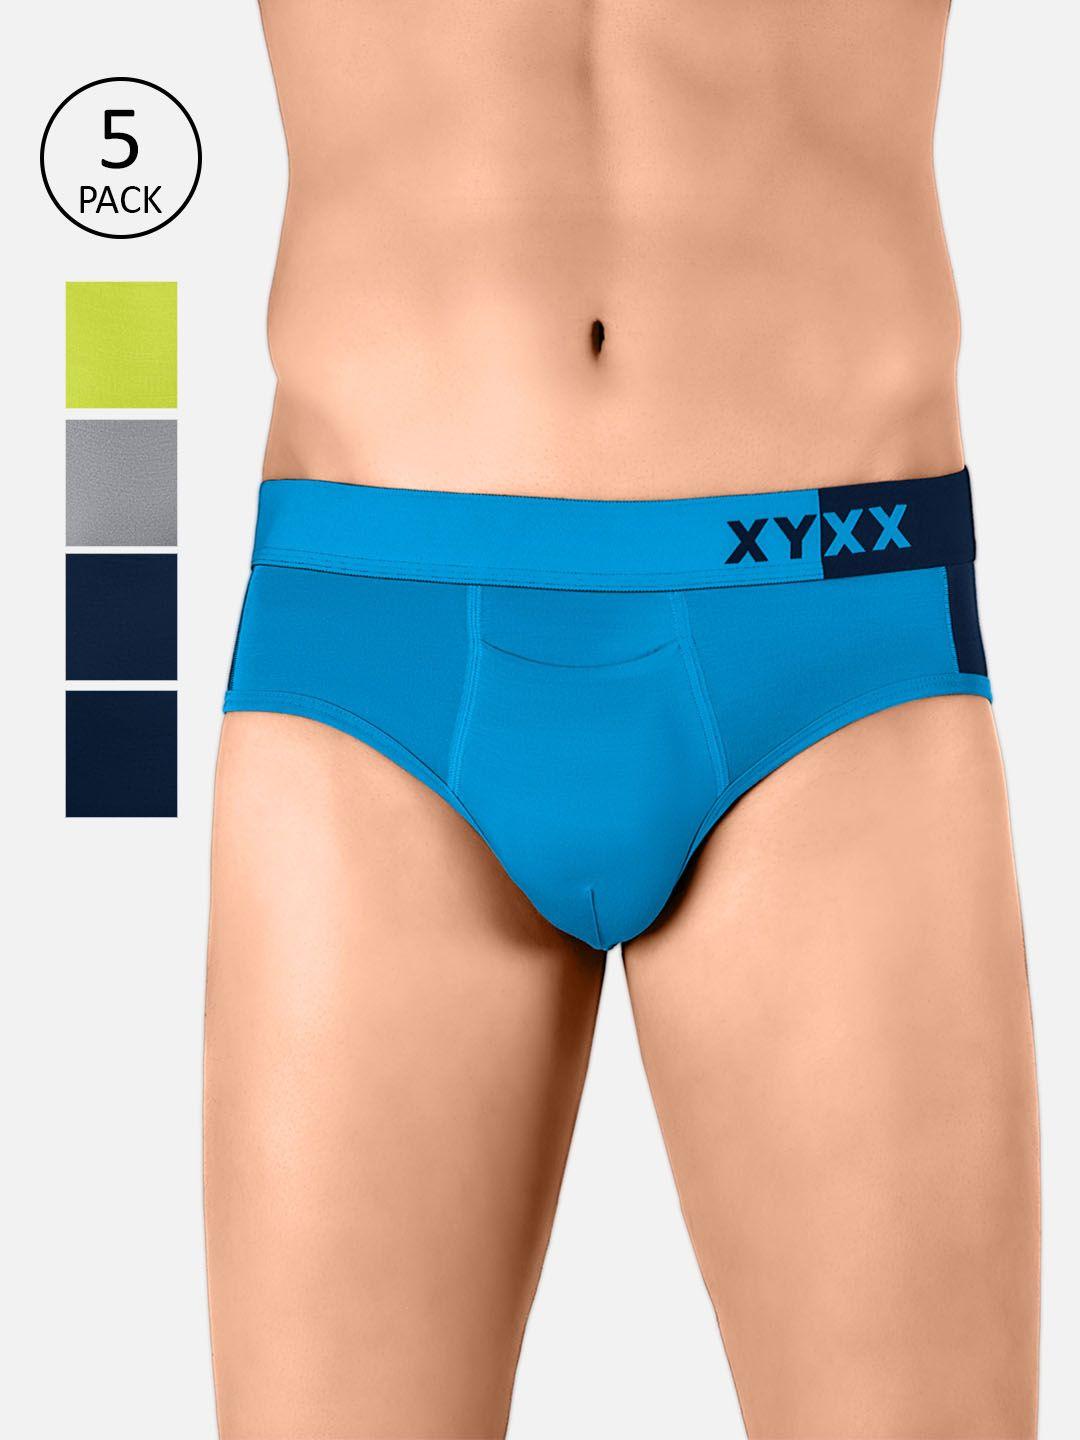 xyxx men intellisoft antimicrobial micro modal pack of 5 dualist briefs xybrf5pckn103